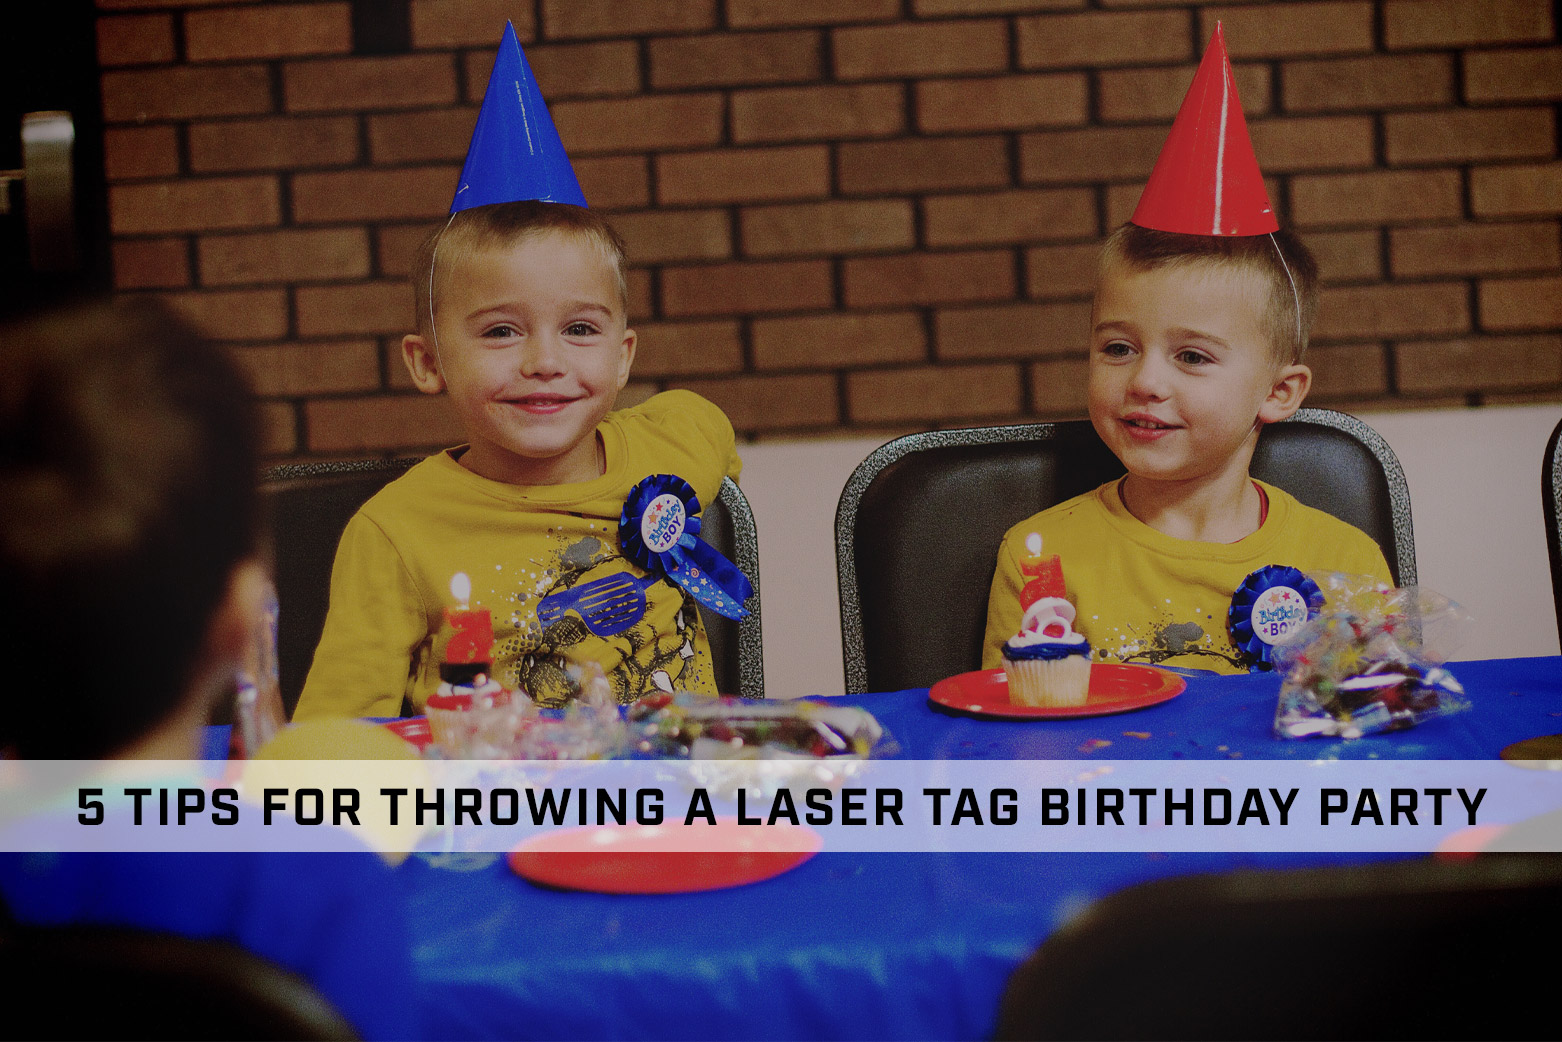 5 Tips for Throwing a Laser Tag Birthday Party